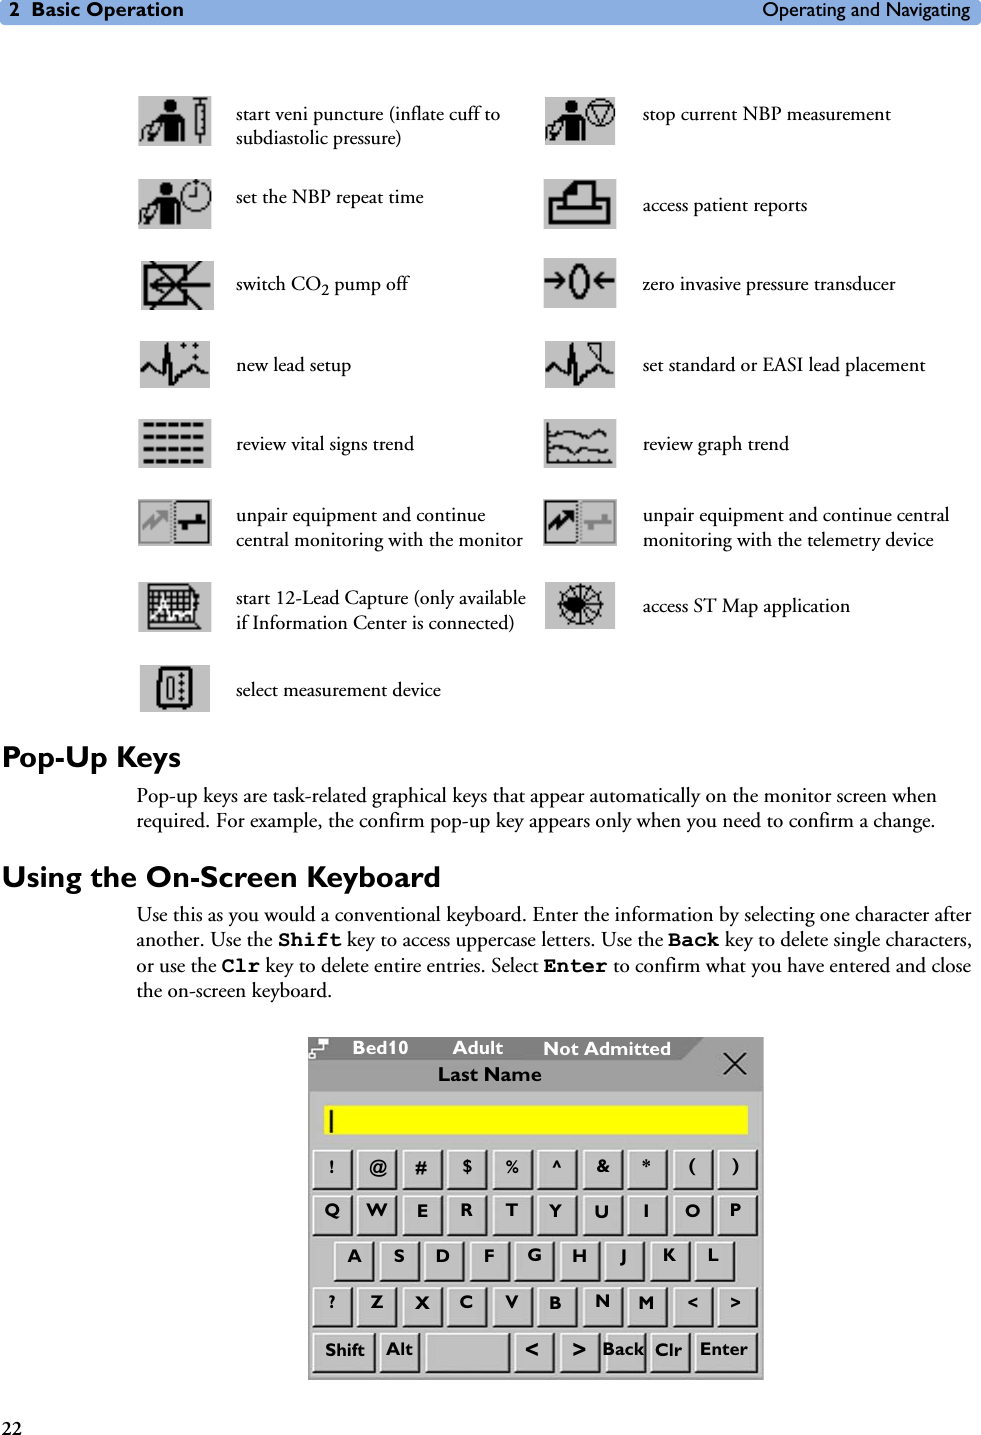 2 Basic Operation Operating and Navigating22Pop-Up KeysPop-up keys are task-related graphical keys that appear automatically on the monitor screen when required. For example, the confirm pop-up key appears only when you need to confirm a change.Using the On-Screen KeyboardUse this as you would a conventional keyboard. Enter the information by selecting one character after another. Use the Shift key to access uppercase letters. Use the Back key to delete single characters, or use the Clr key to delete entire entries. Select Enter to confirm what you have entered and close the on-screen keyboard.start veni puncture (inflate cuff to subdiastolic pressure)stop current NBP measurementset the NBP repeat time access patient reportsswitch CO2 pump off zero invasive pressure transducernew lead setup set standard or EASI lead placementreview vital signs trend review graph trendunpair equipment and continue central monitoring with the monitorunpair equipment and continue central monitoring with the telemetry devicestart 12-Lead Capture (only available if Information Center is connected) access ST Map applicationselect measurement deviceAdultBed10 Not Admitted@!#$%^*()QWETR&amp;JGHFDSAPOIUY?ZXVC&gt;&lt;MNBKLAlt &lt;&gt; ClrShift Back EnterLast Name